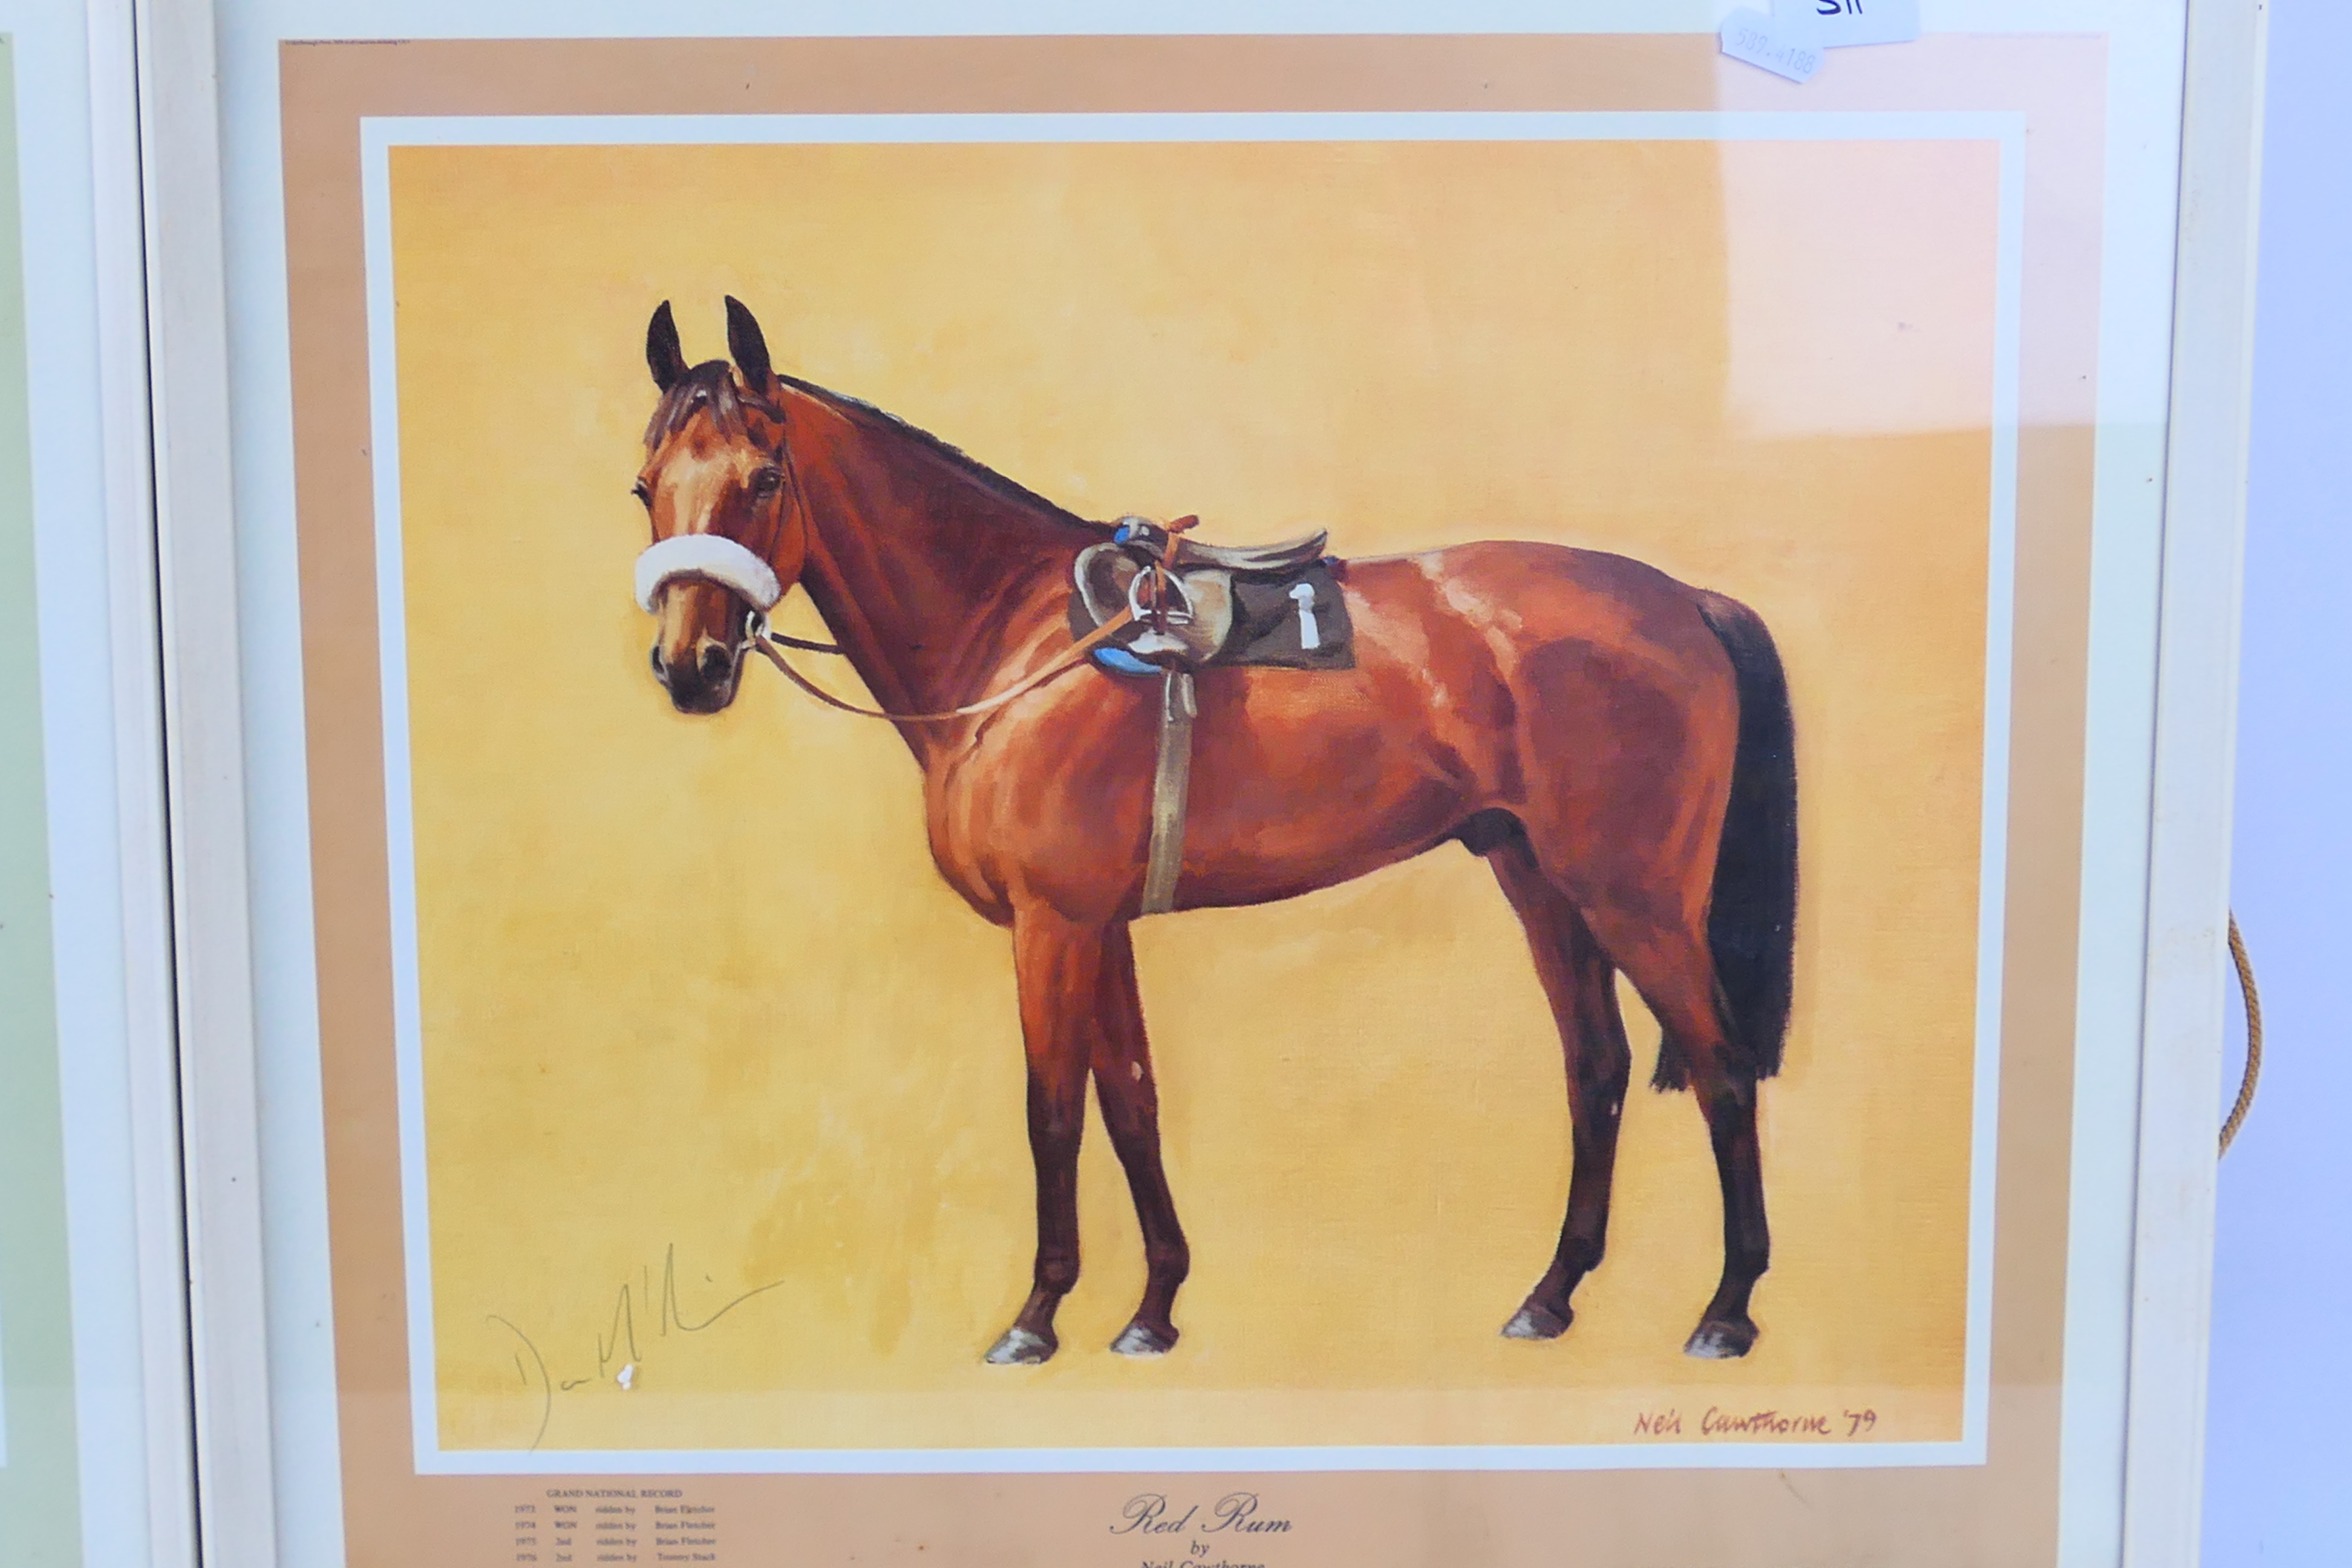 Two Neil Cawthorne horse racing prints comprising Red Rum, - Image 4 of 6